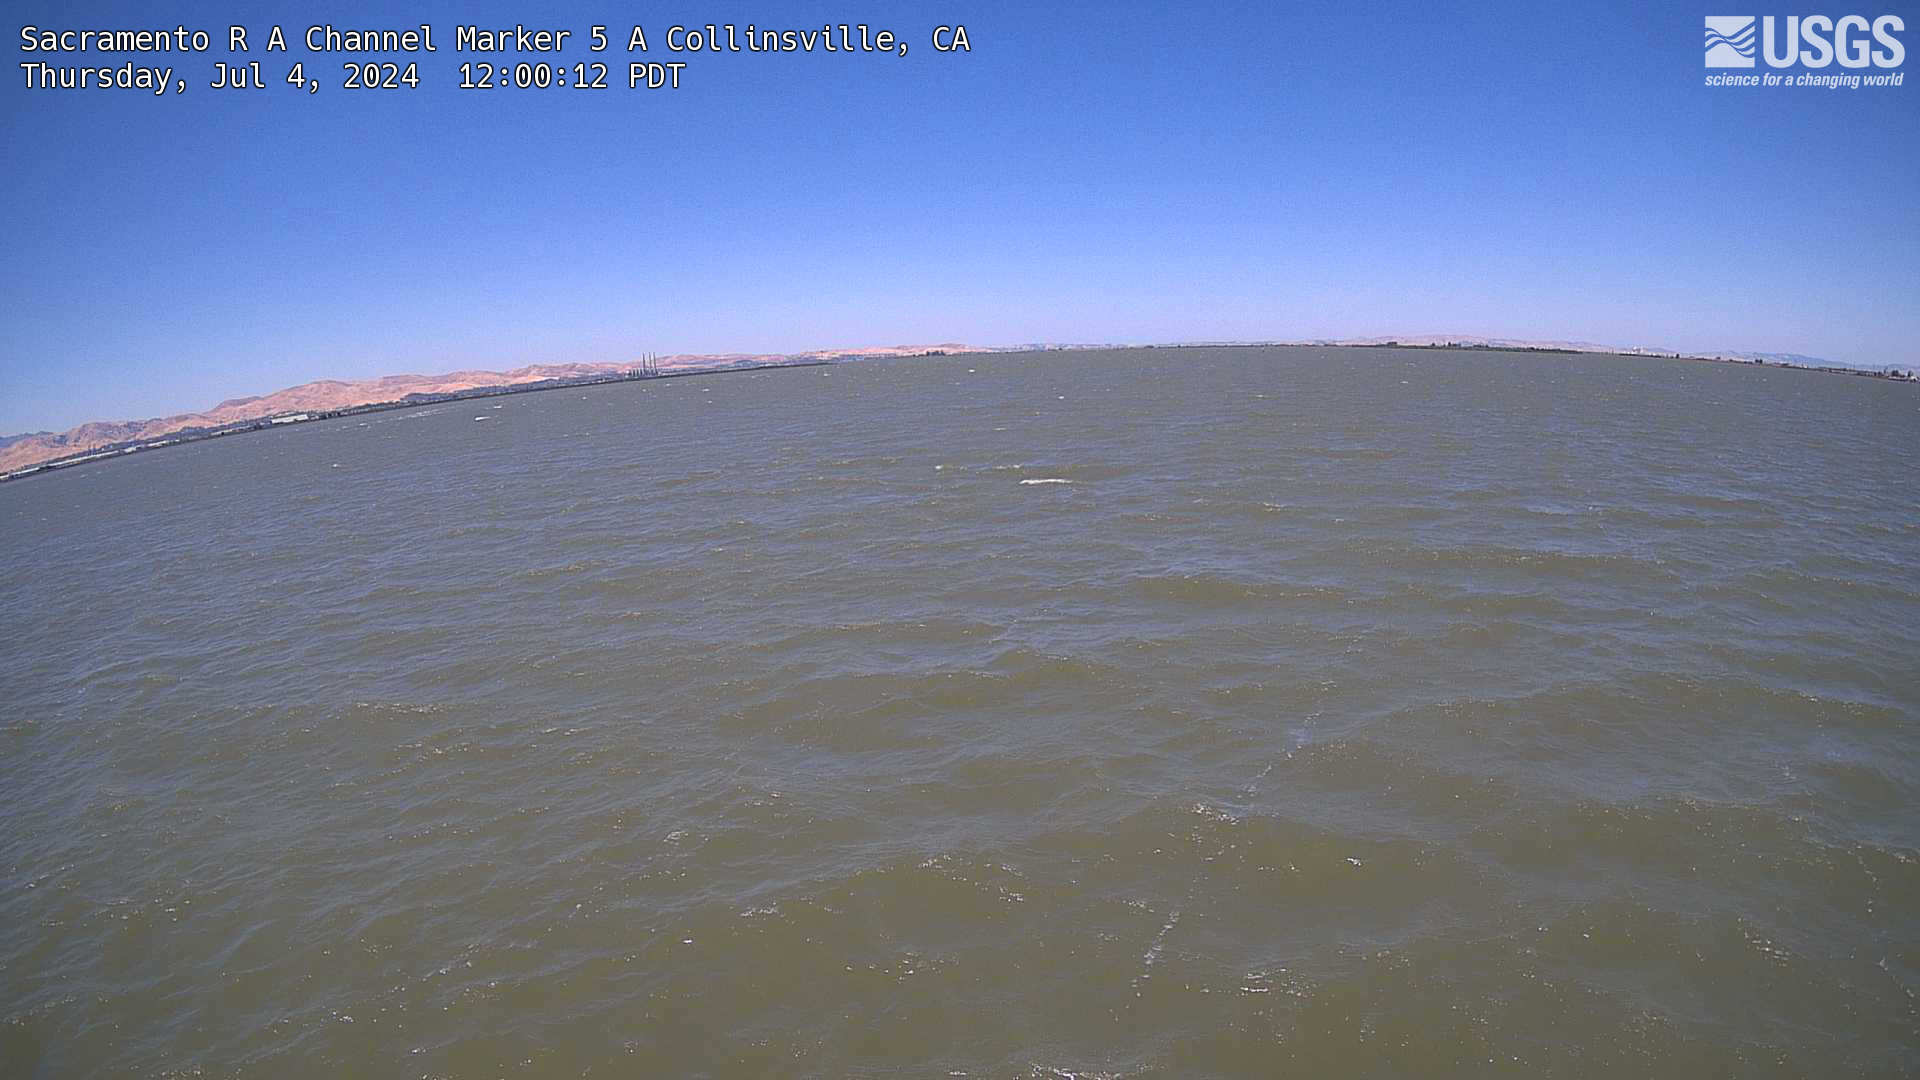 This is the most recent camera image of Sacramento R A Channel Marker 5 A Collinsville webcam.